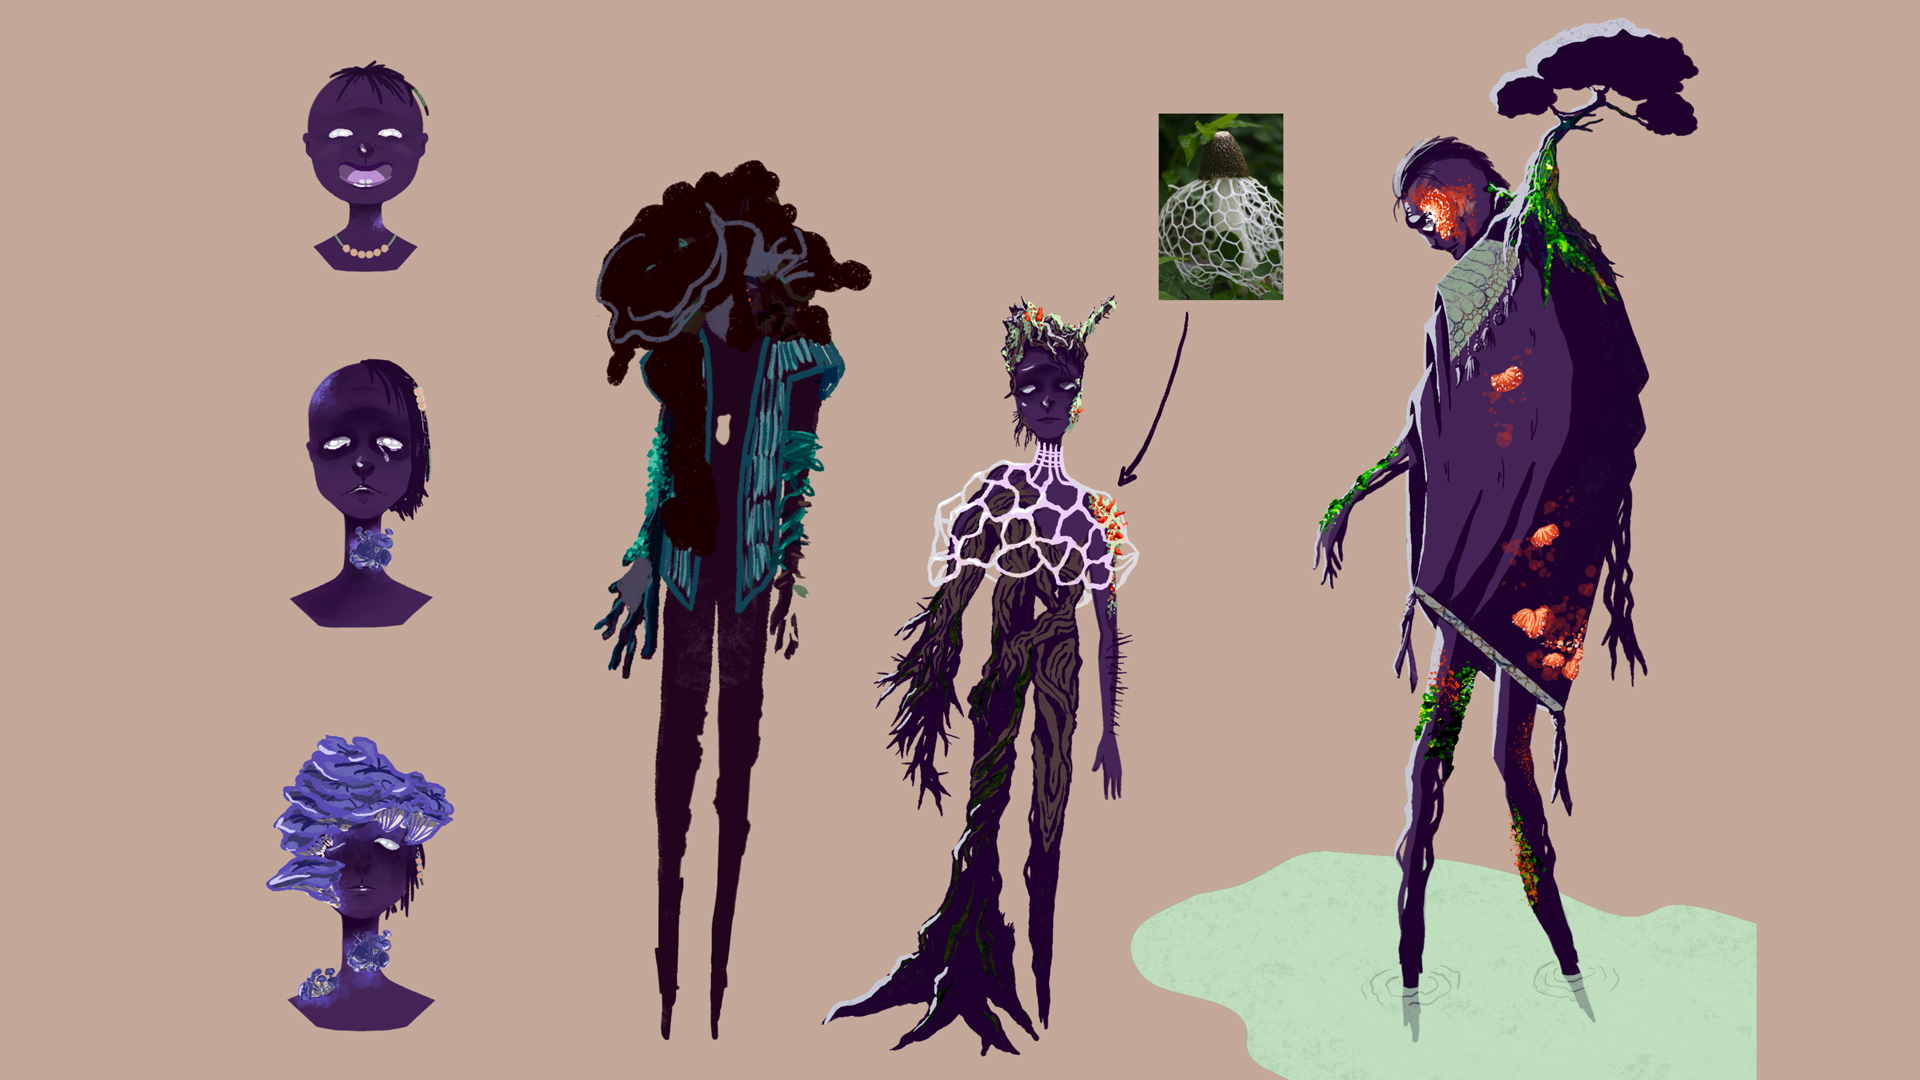 Concept art of progressive organic material growth on characters' faces and bodies.